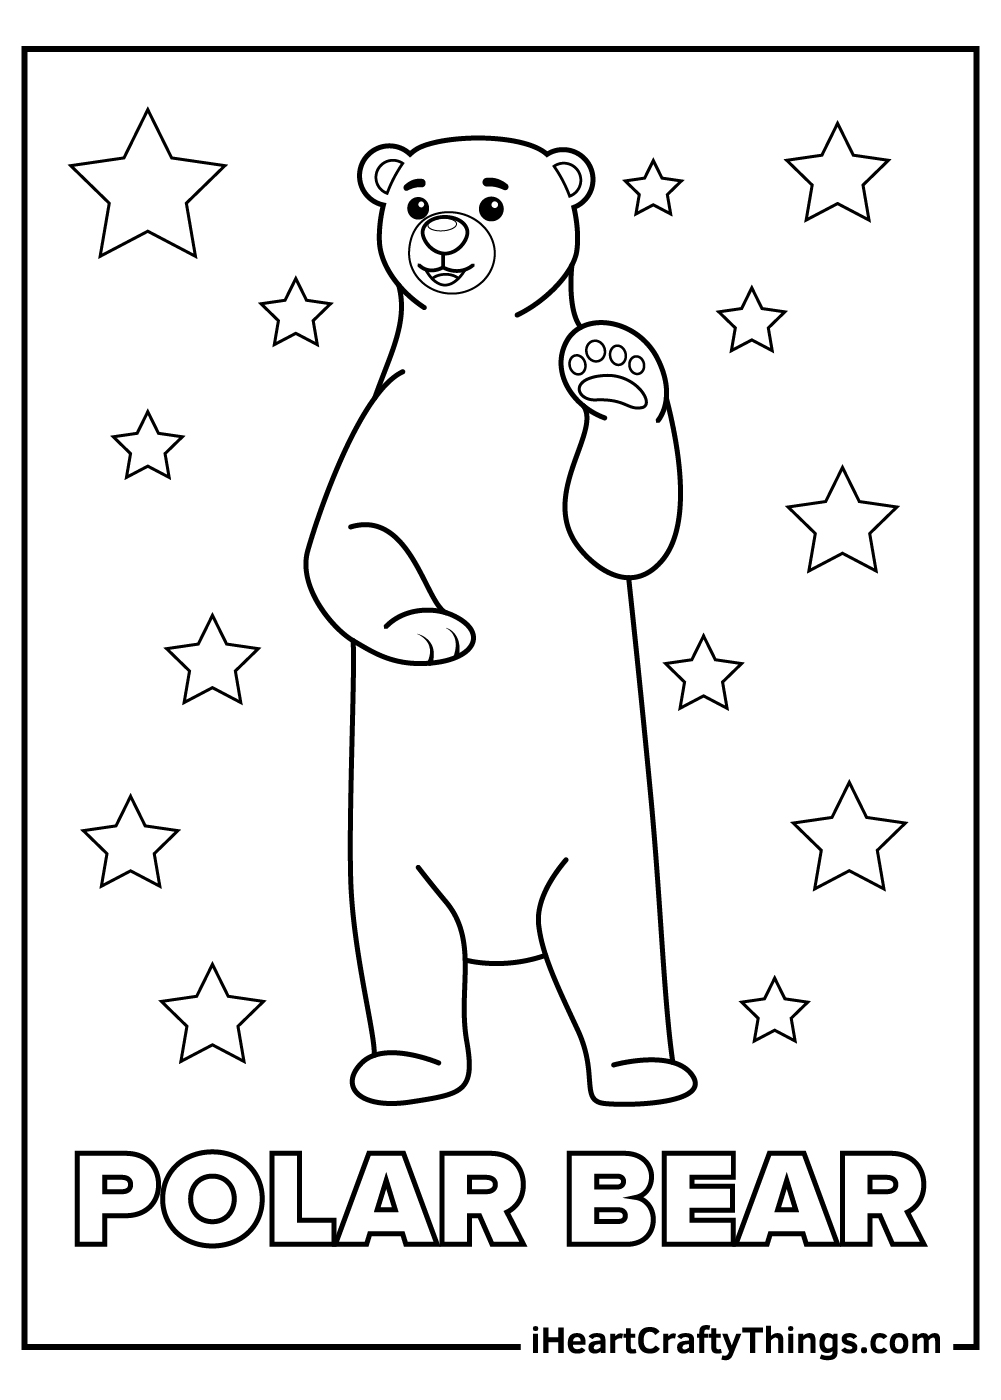 Polar bears coloring pages free printables